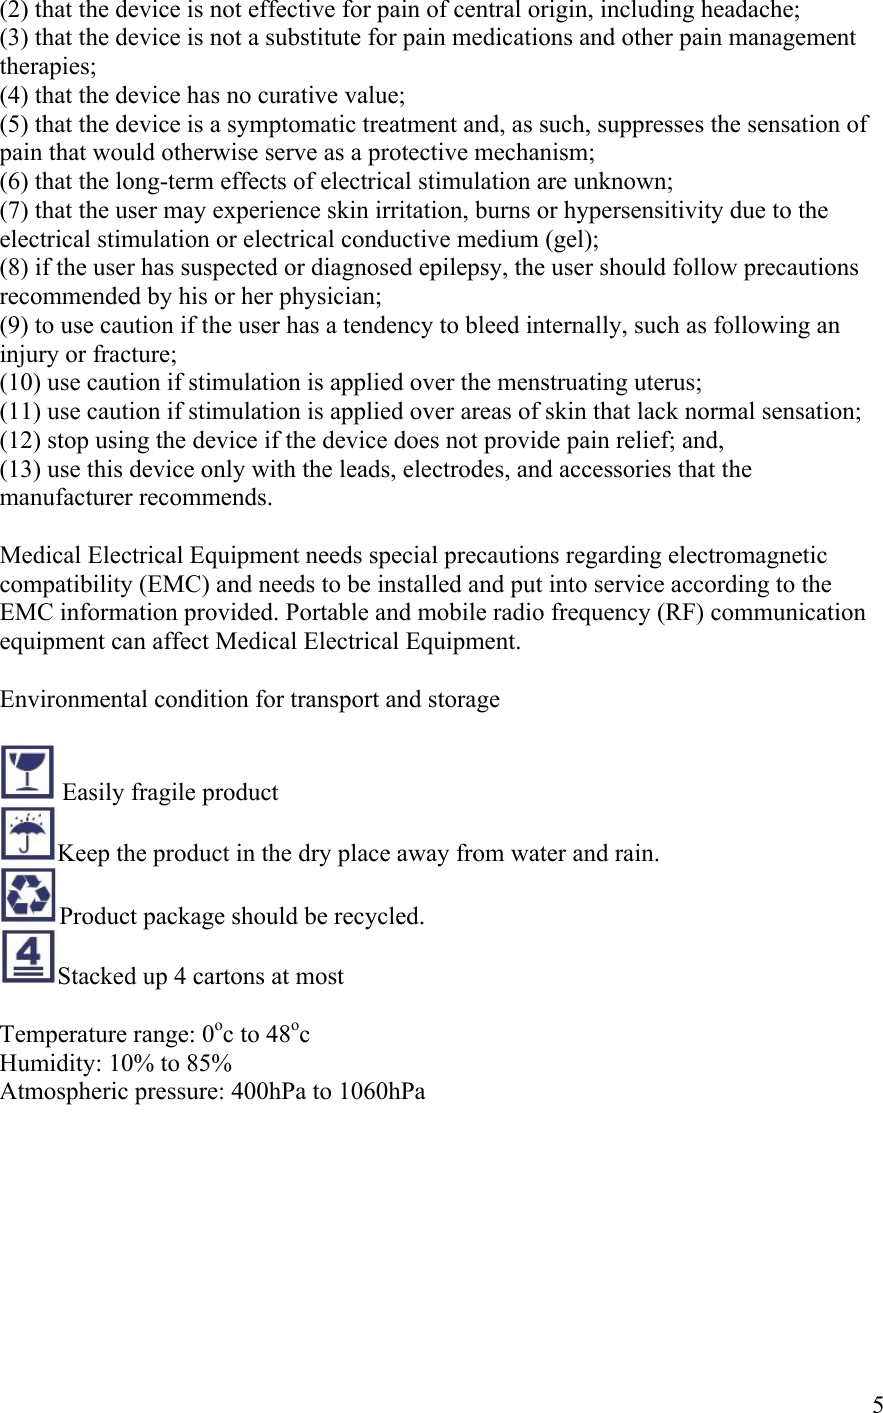 Page 5 of 11 - Sharper Image - 204058 TENS Unit-Manual  205073